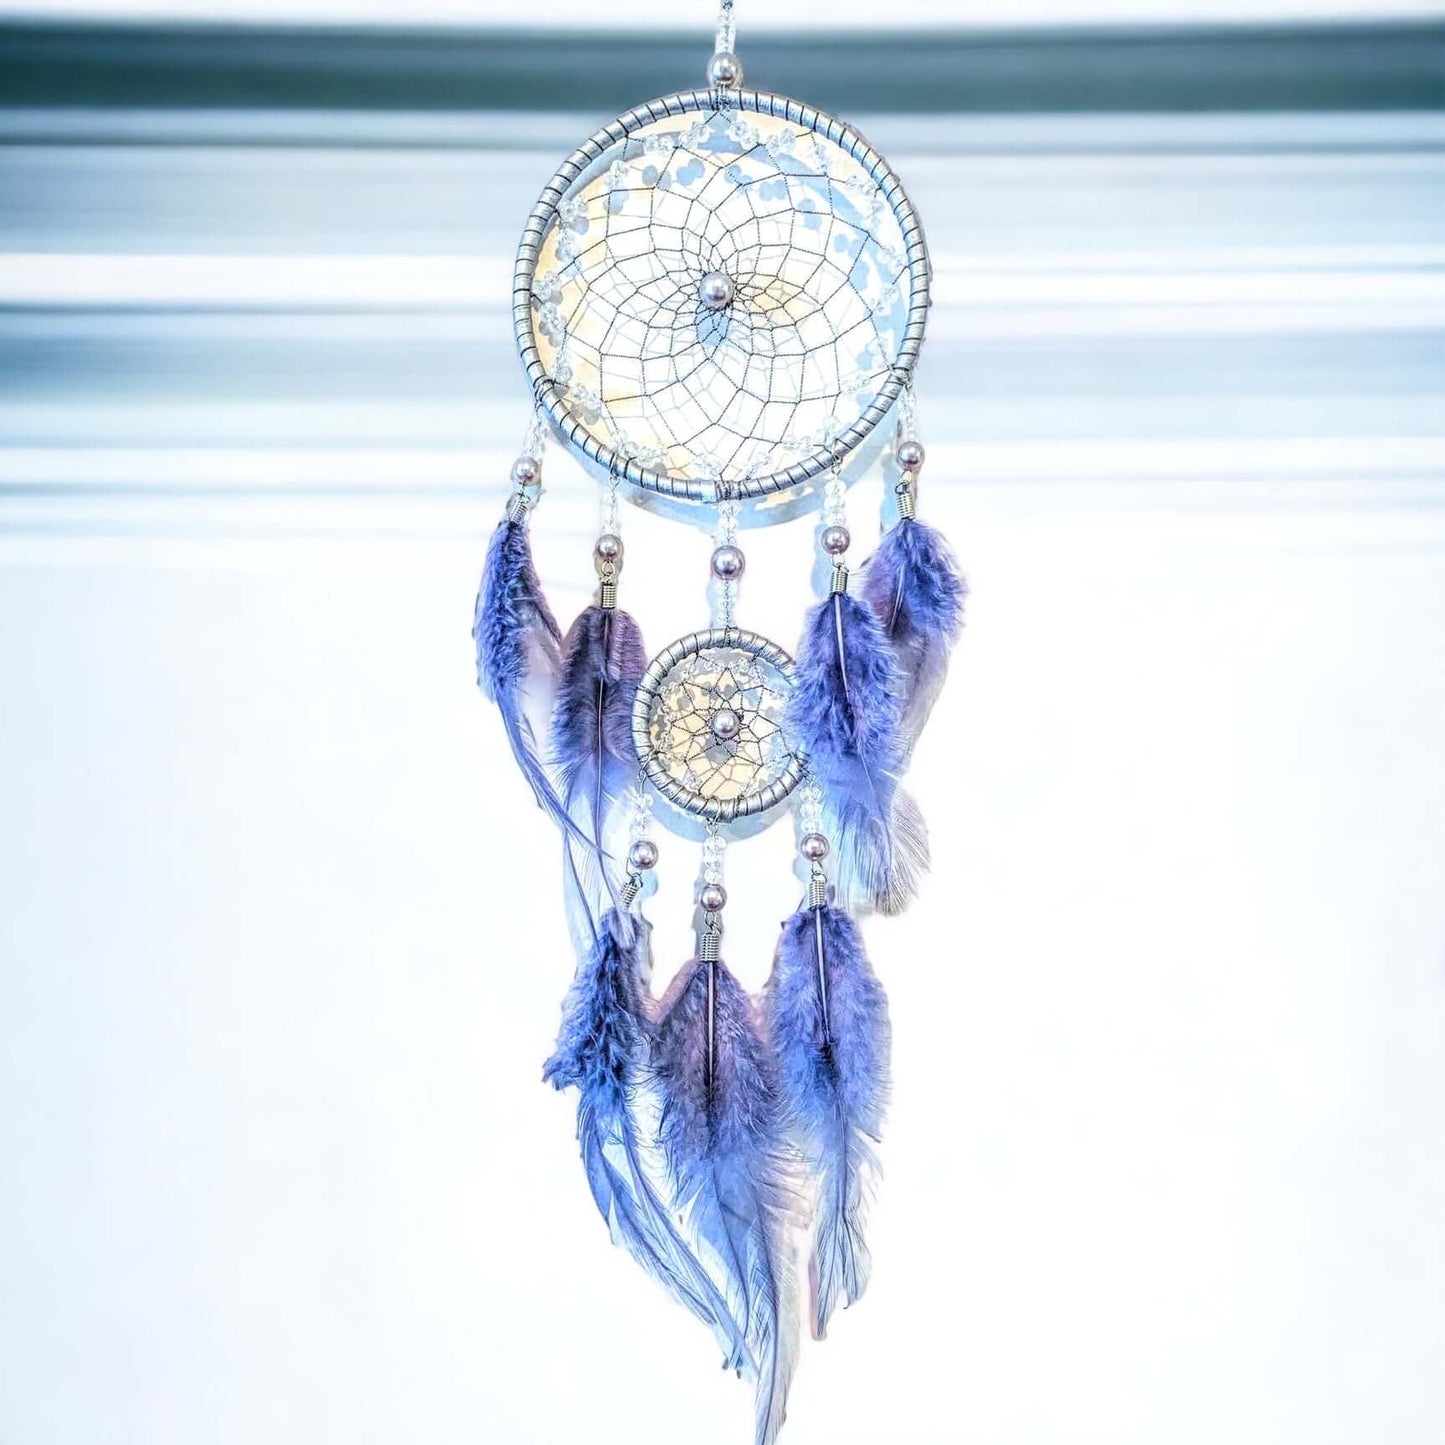 Blue and silver dream catcher with beads and blue feathers on white wall